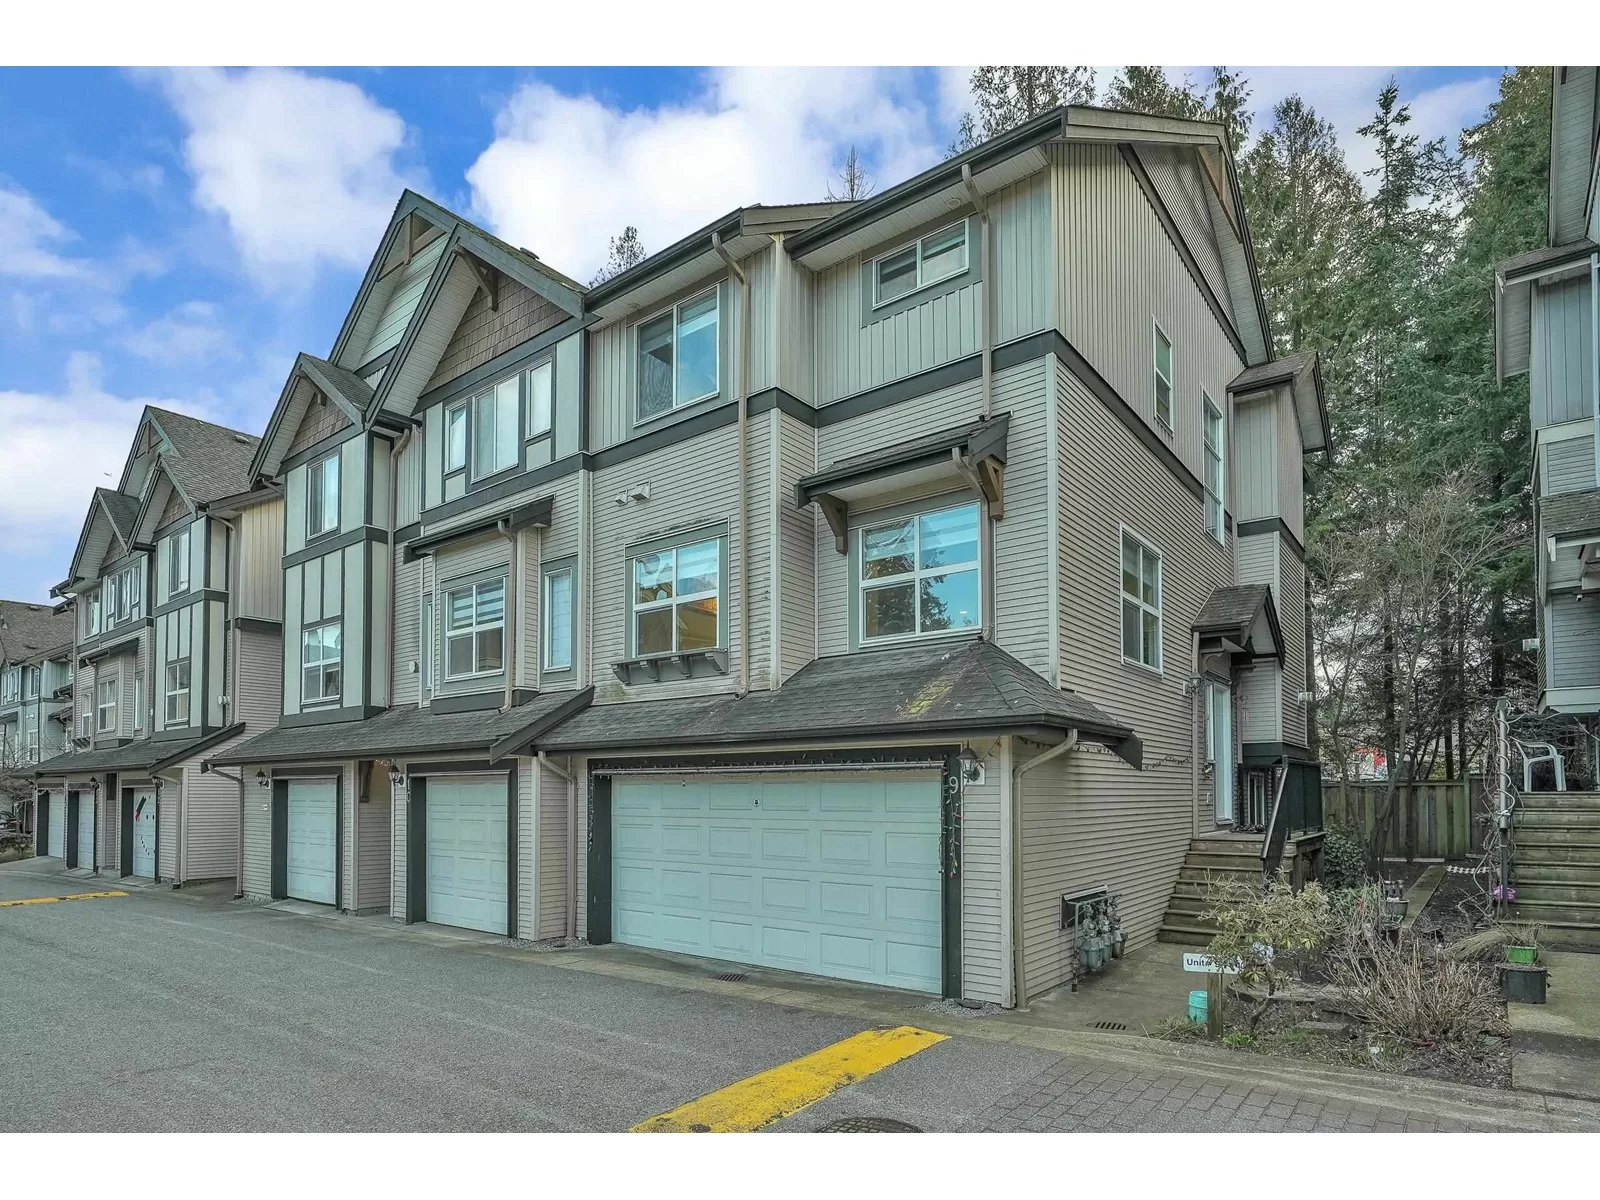 Row / Townhouse for rent: 9 6366 126 Street, Surrey, British Columbia V3X 1T9